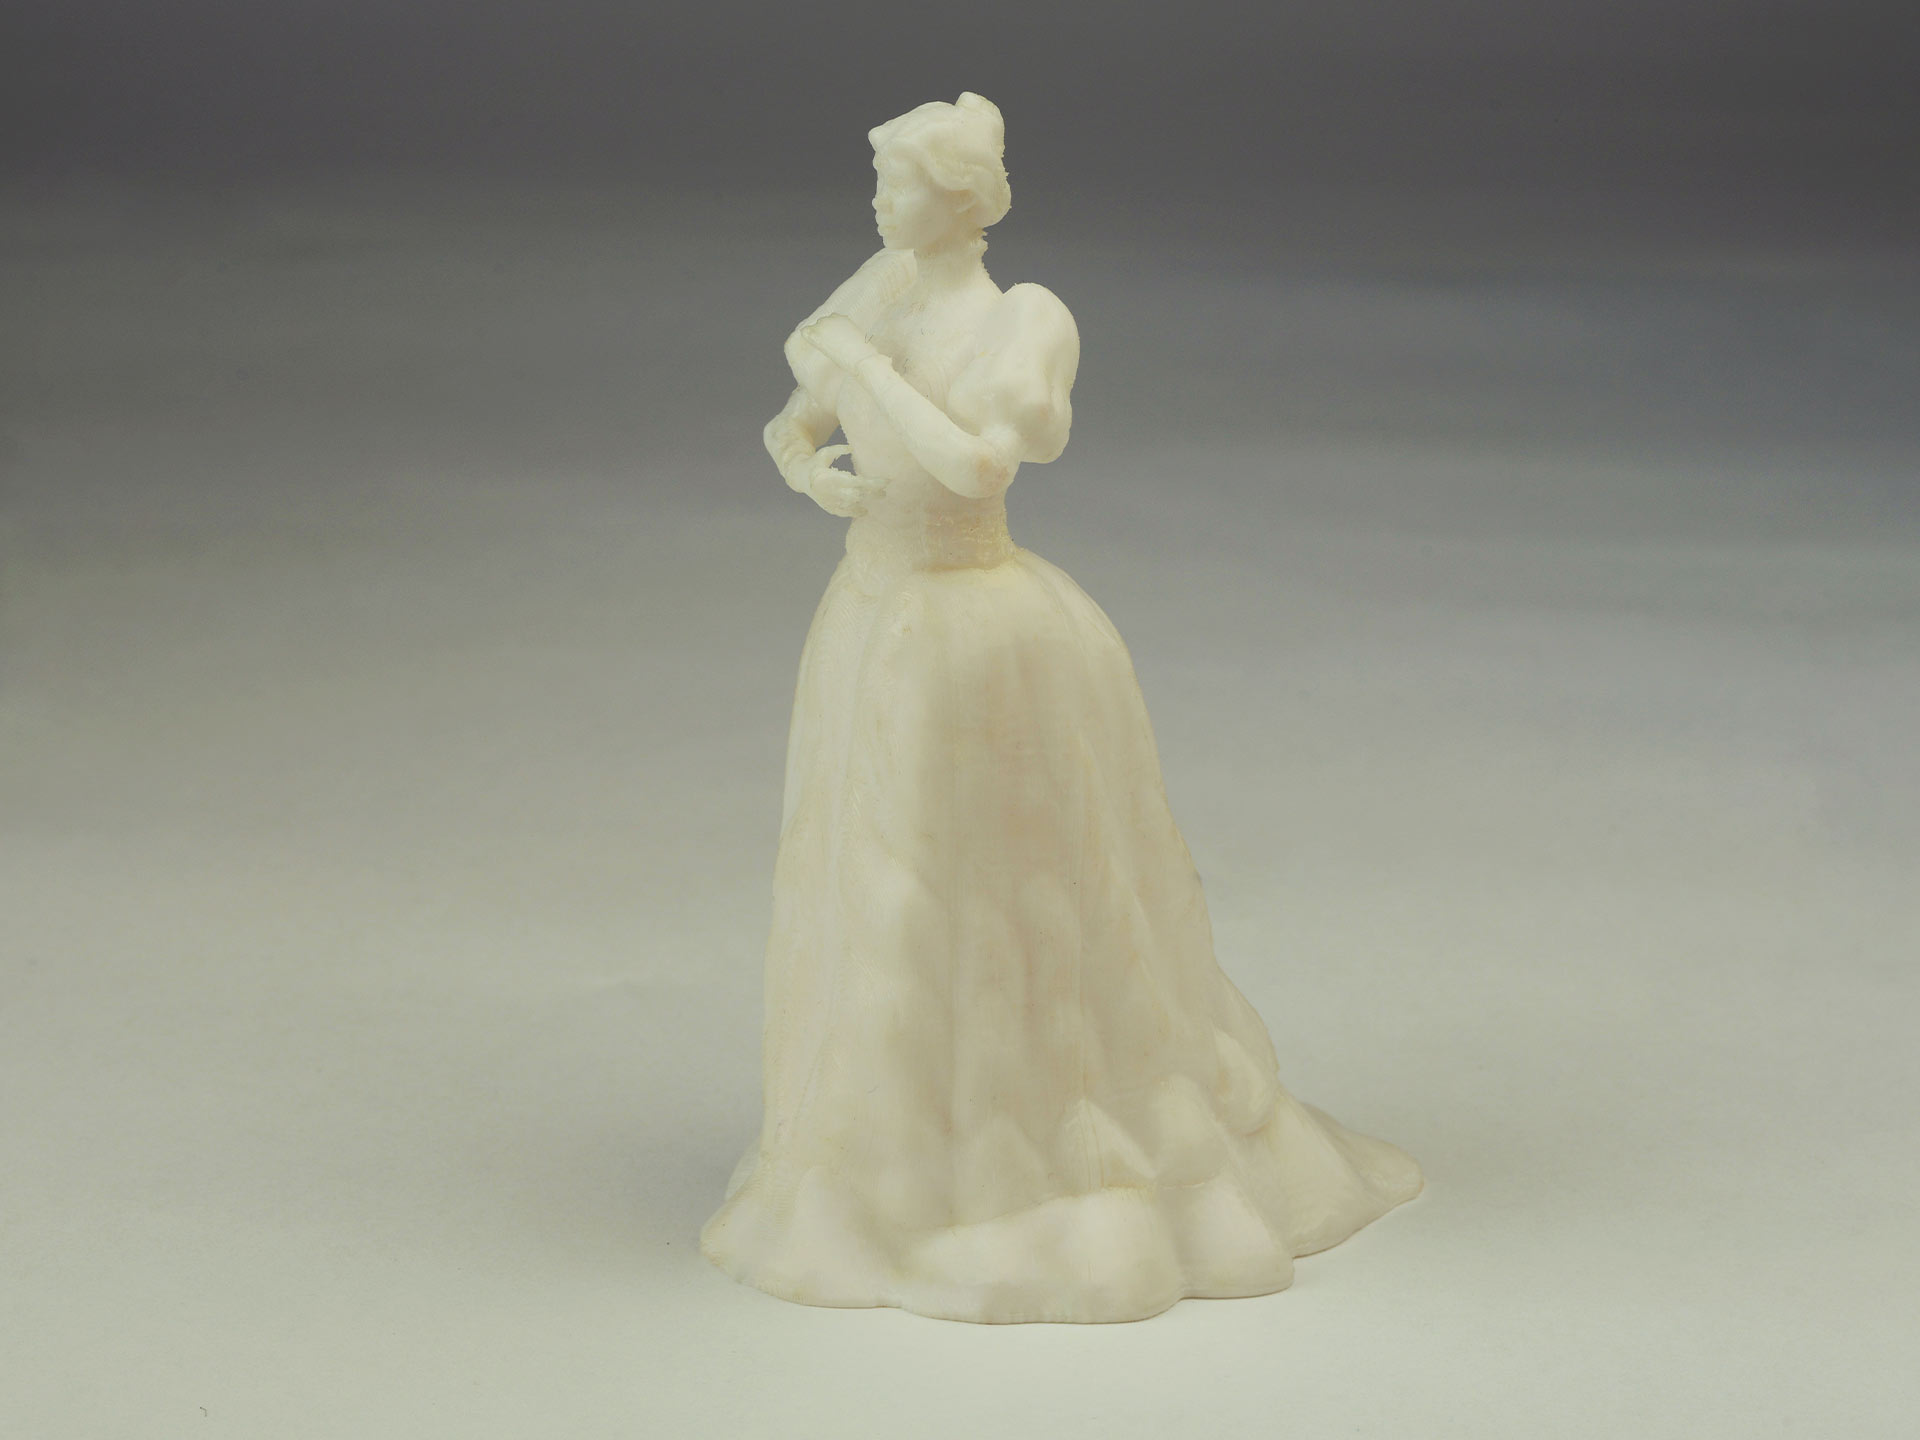 A photograph of a 3d print of a woman in a large dress